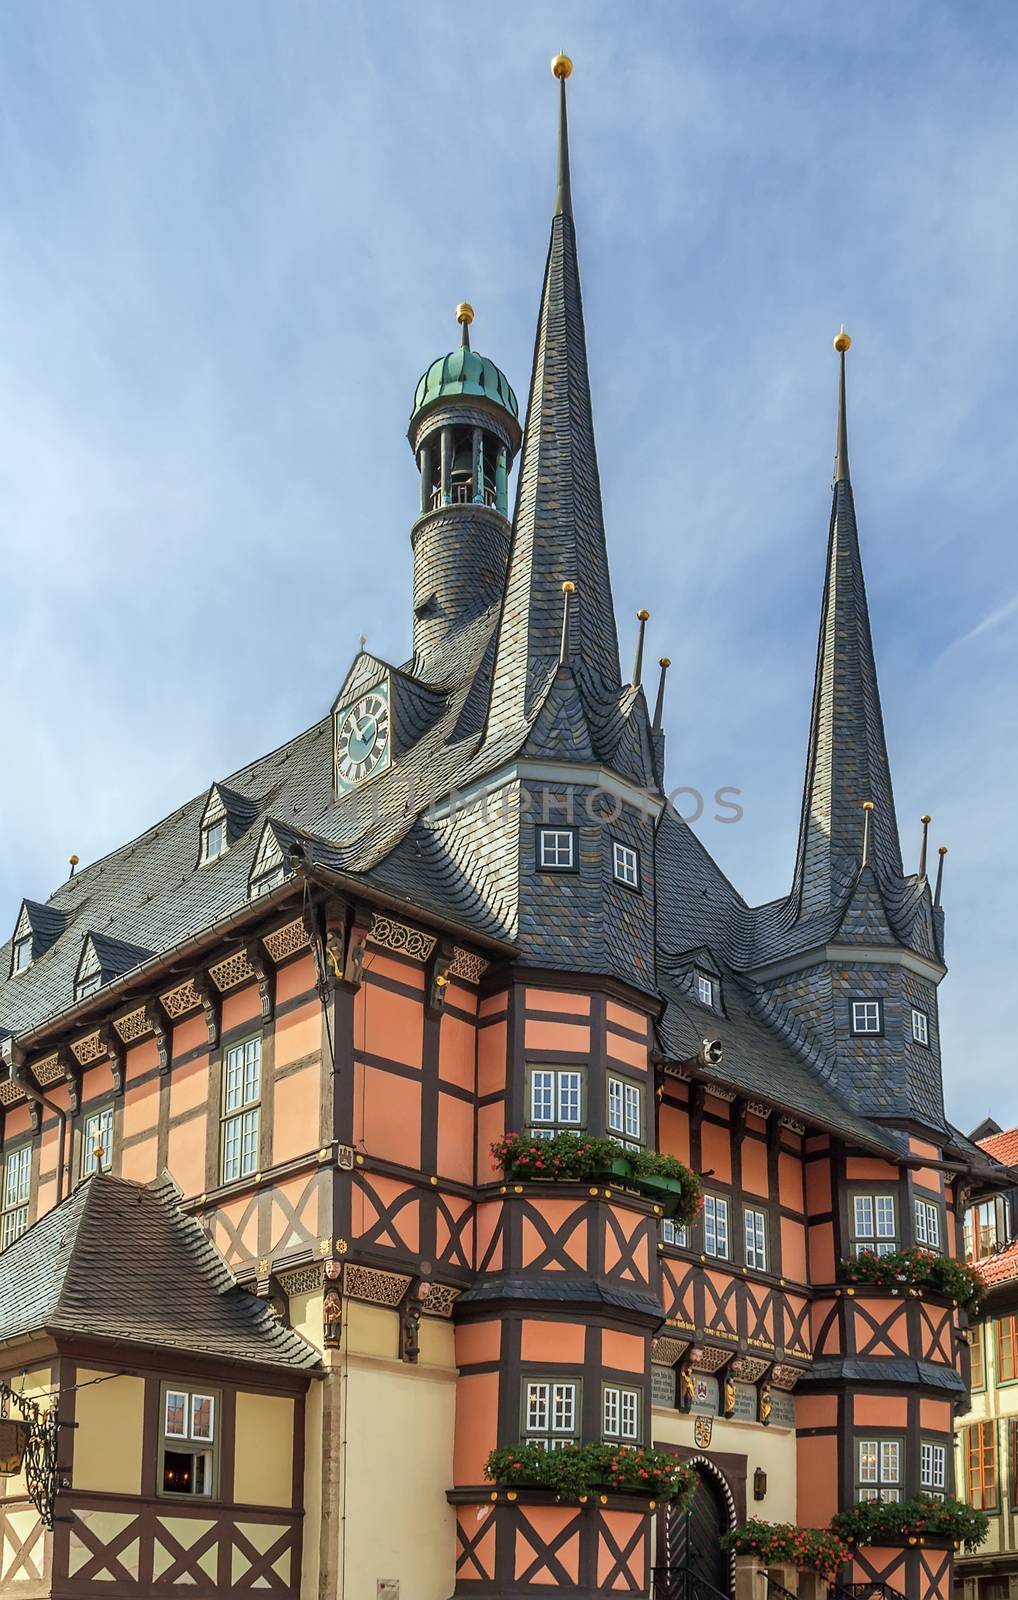 town hall of Wernigerode, Germanl by borisb17